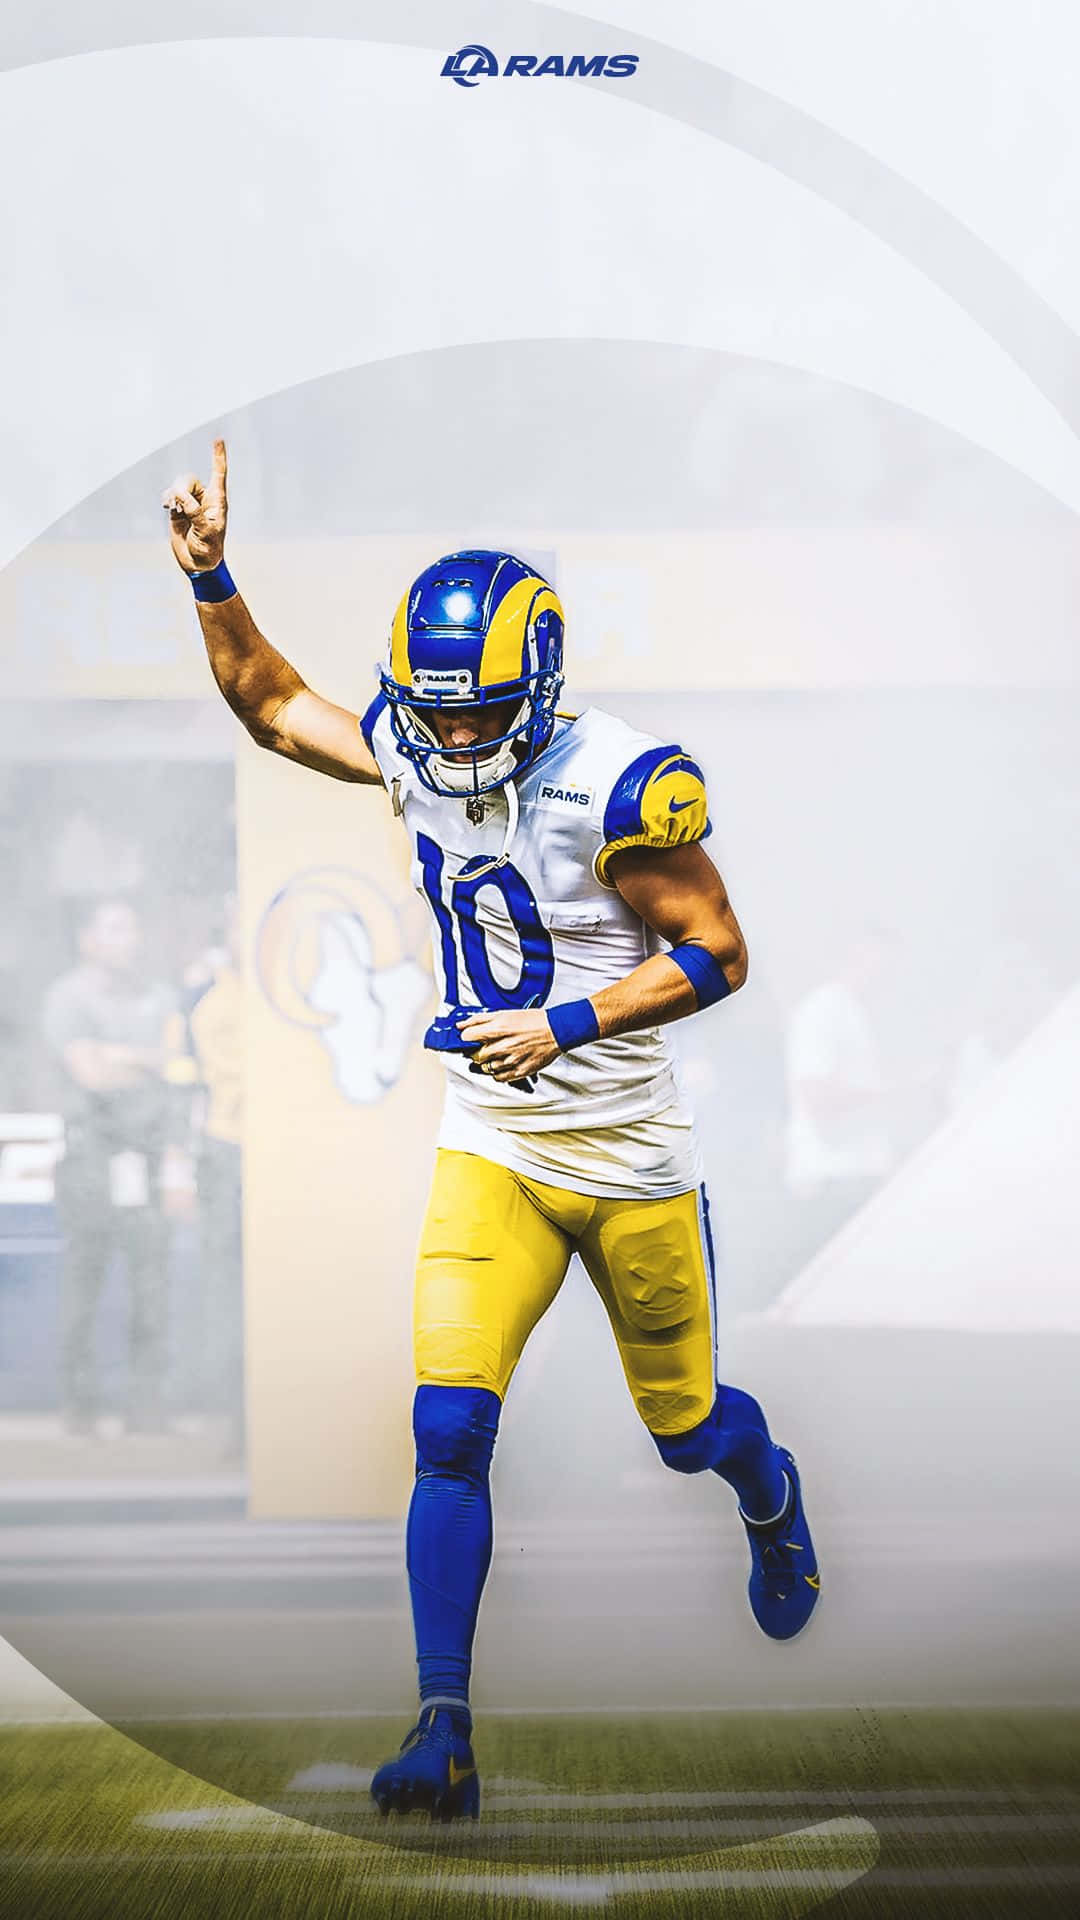 Stand tall among the crowd. #CoolRams Wallpaper